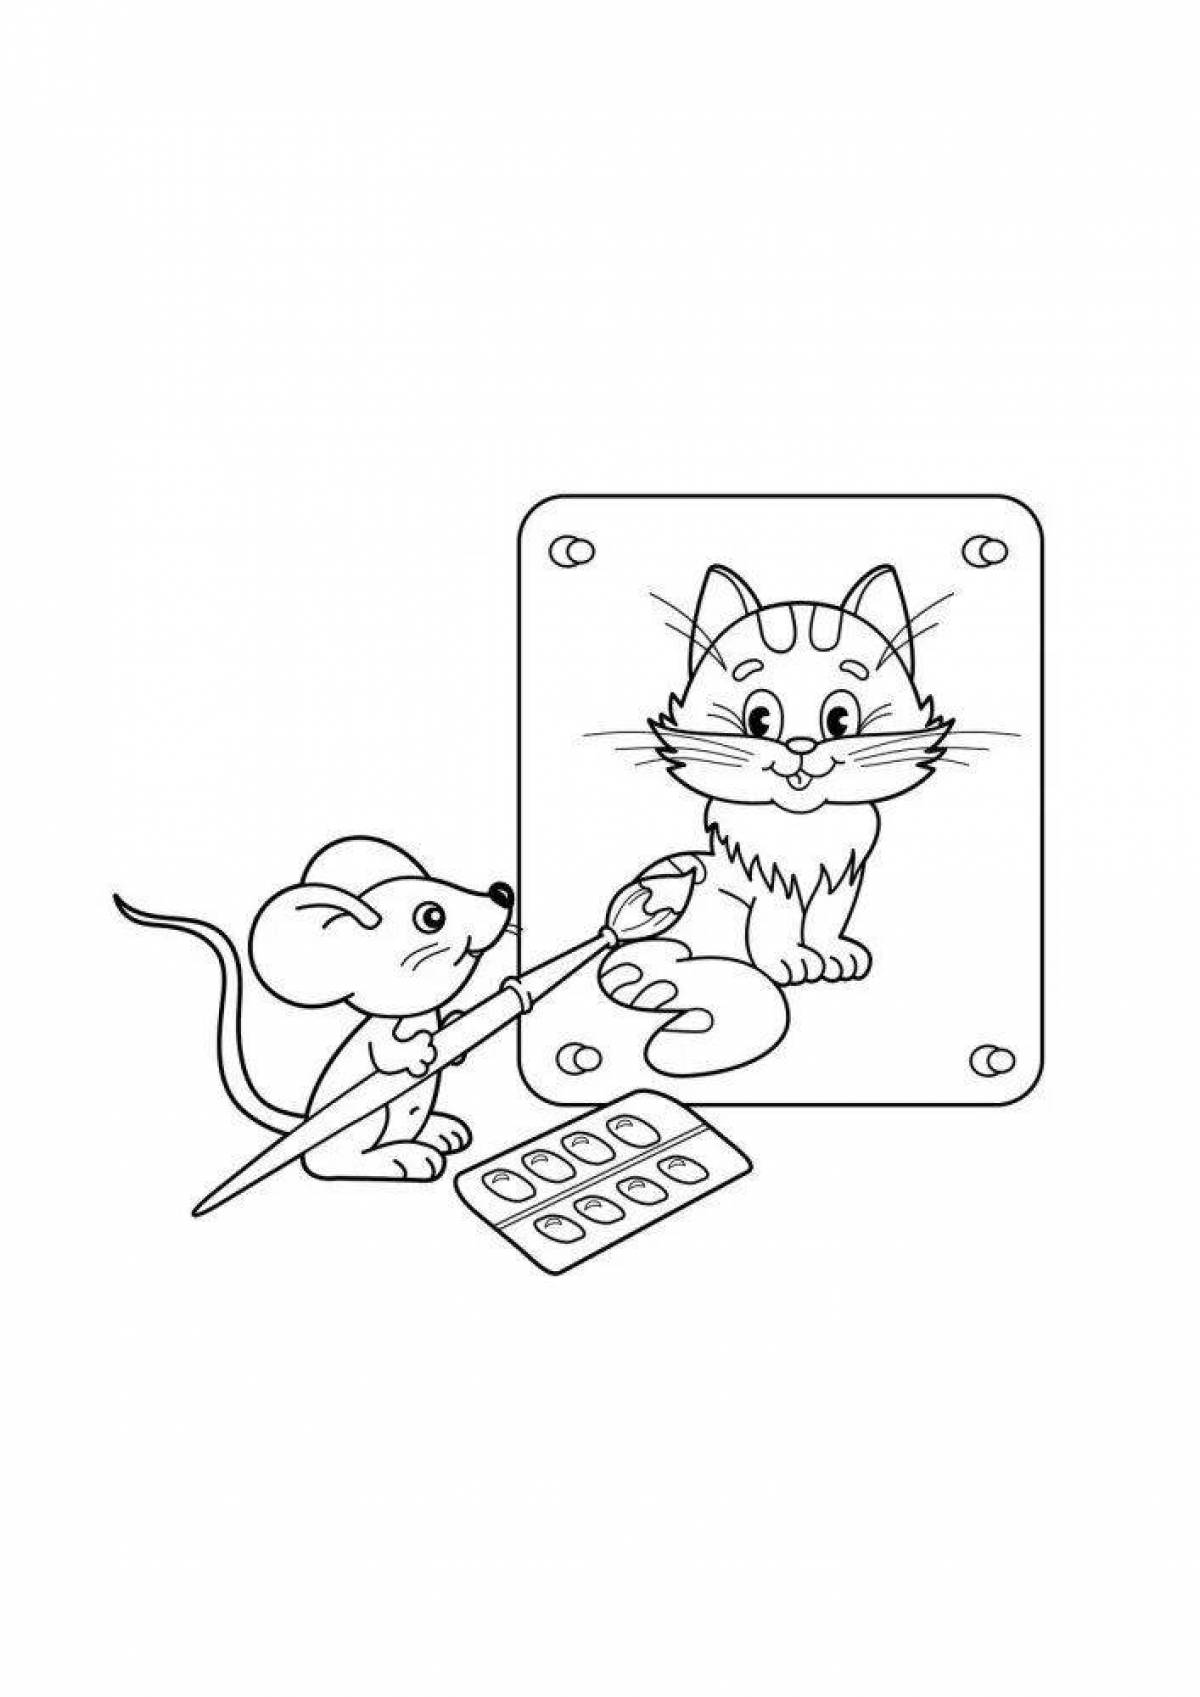 Joyful cat and mouse coloring book